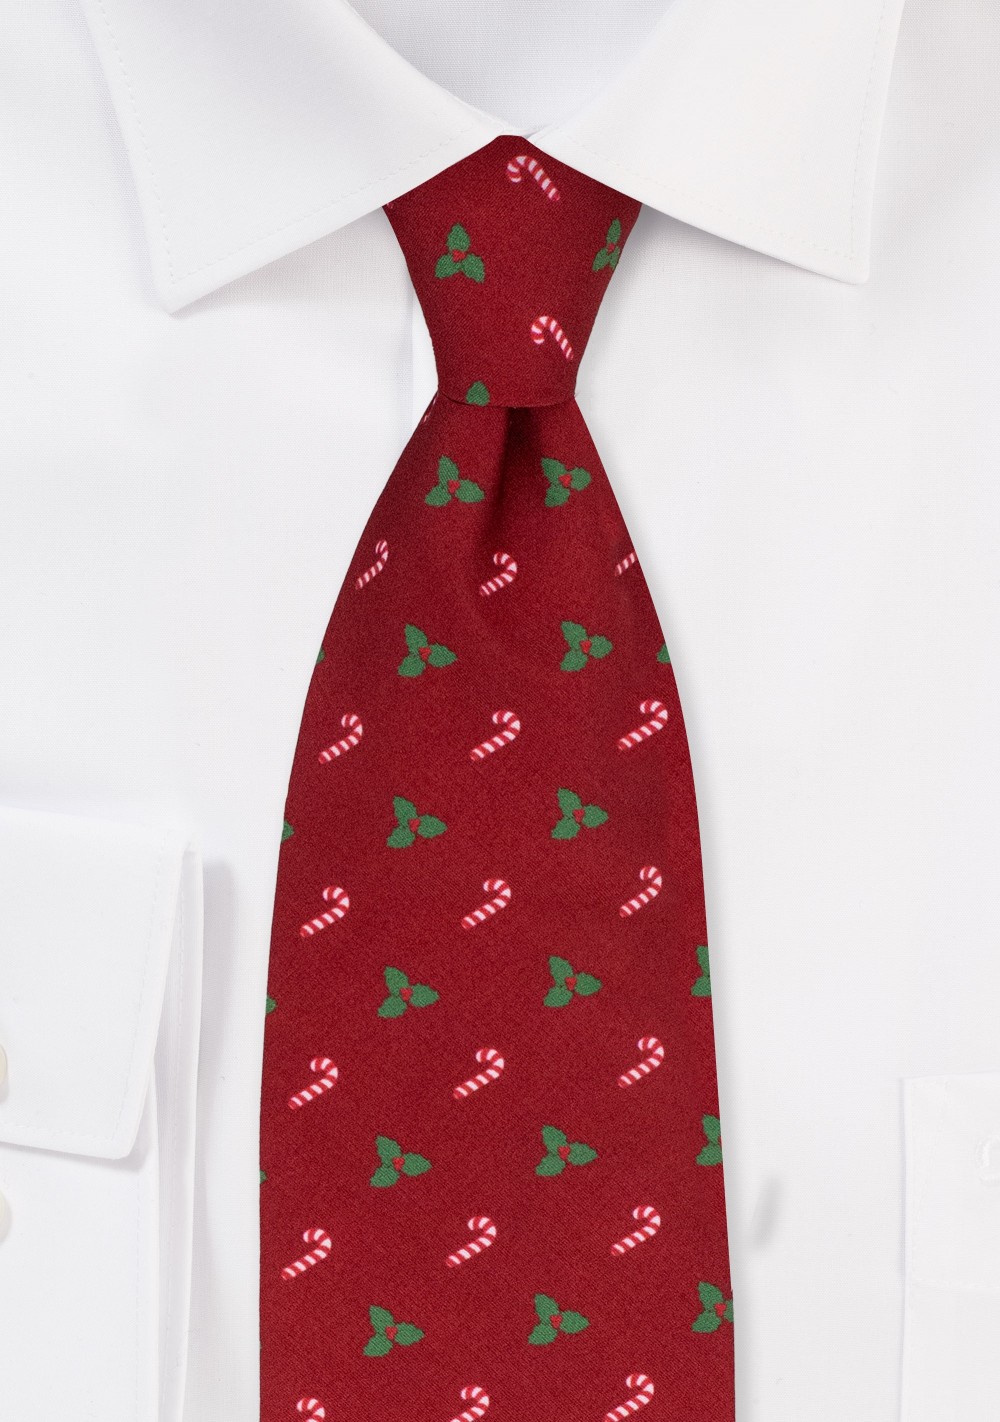 Christmas Print with Candy Canes and Holly Leaves